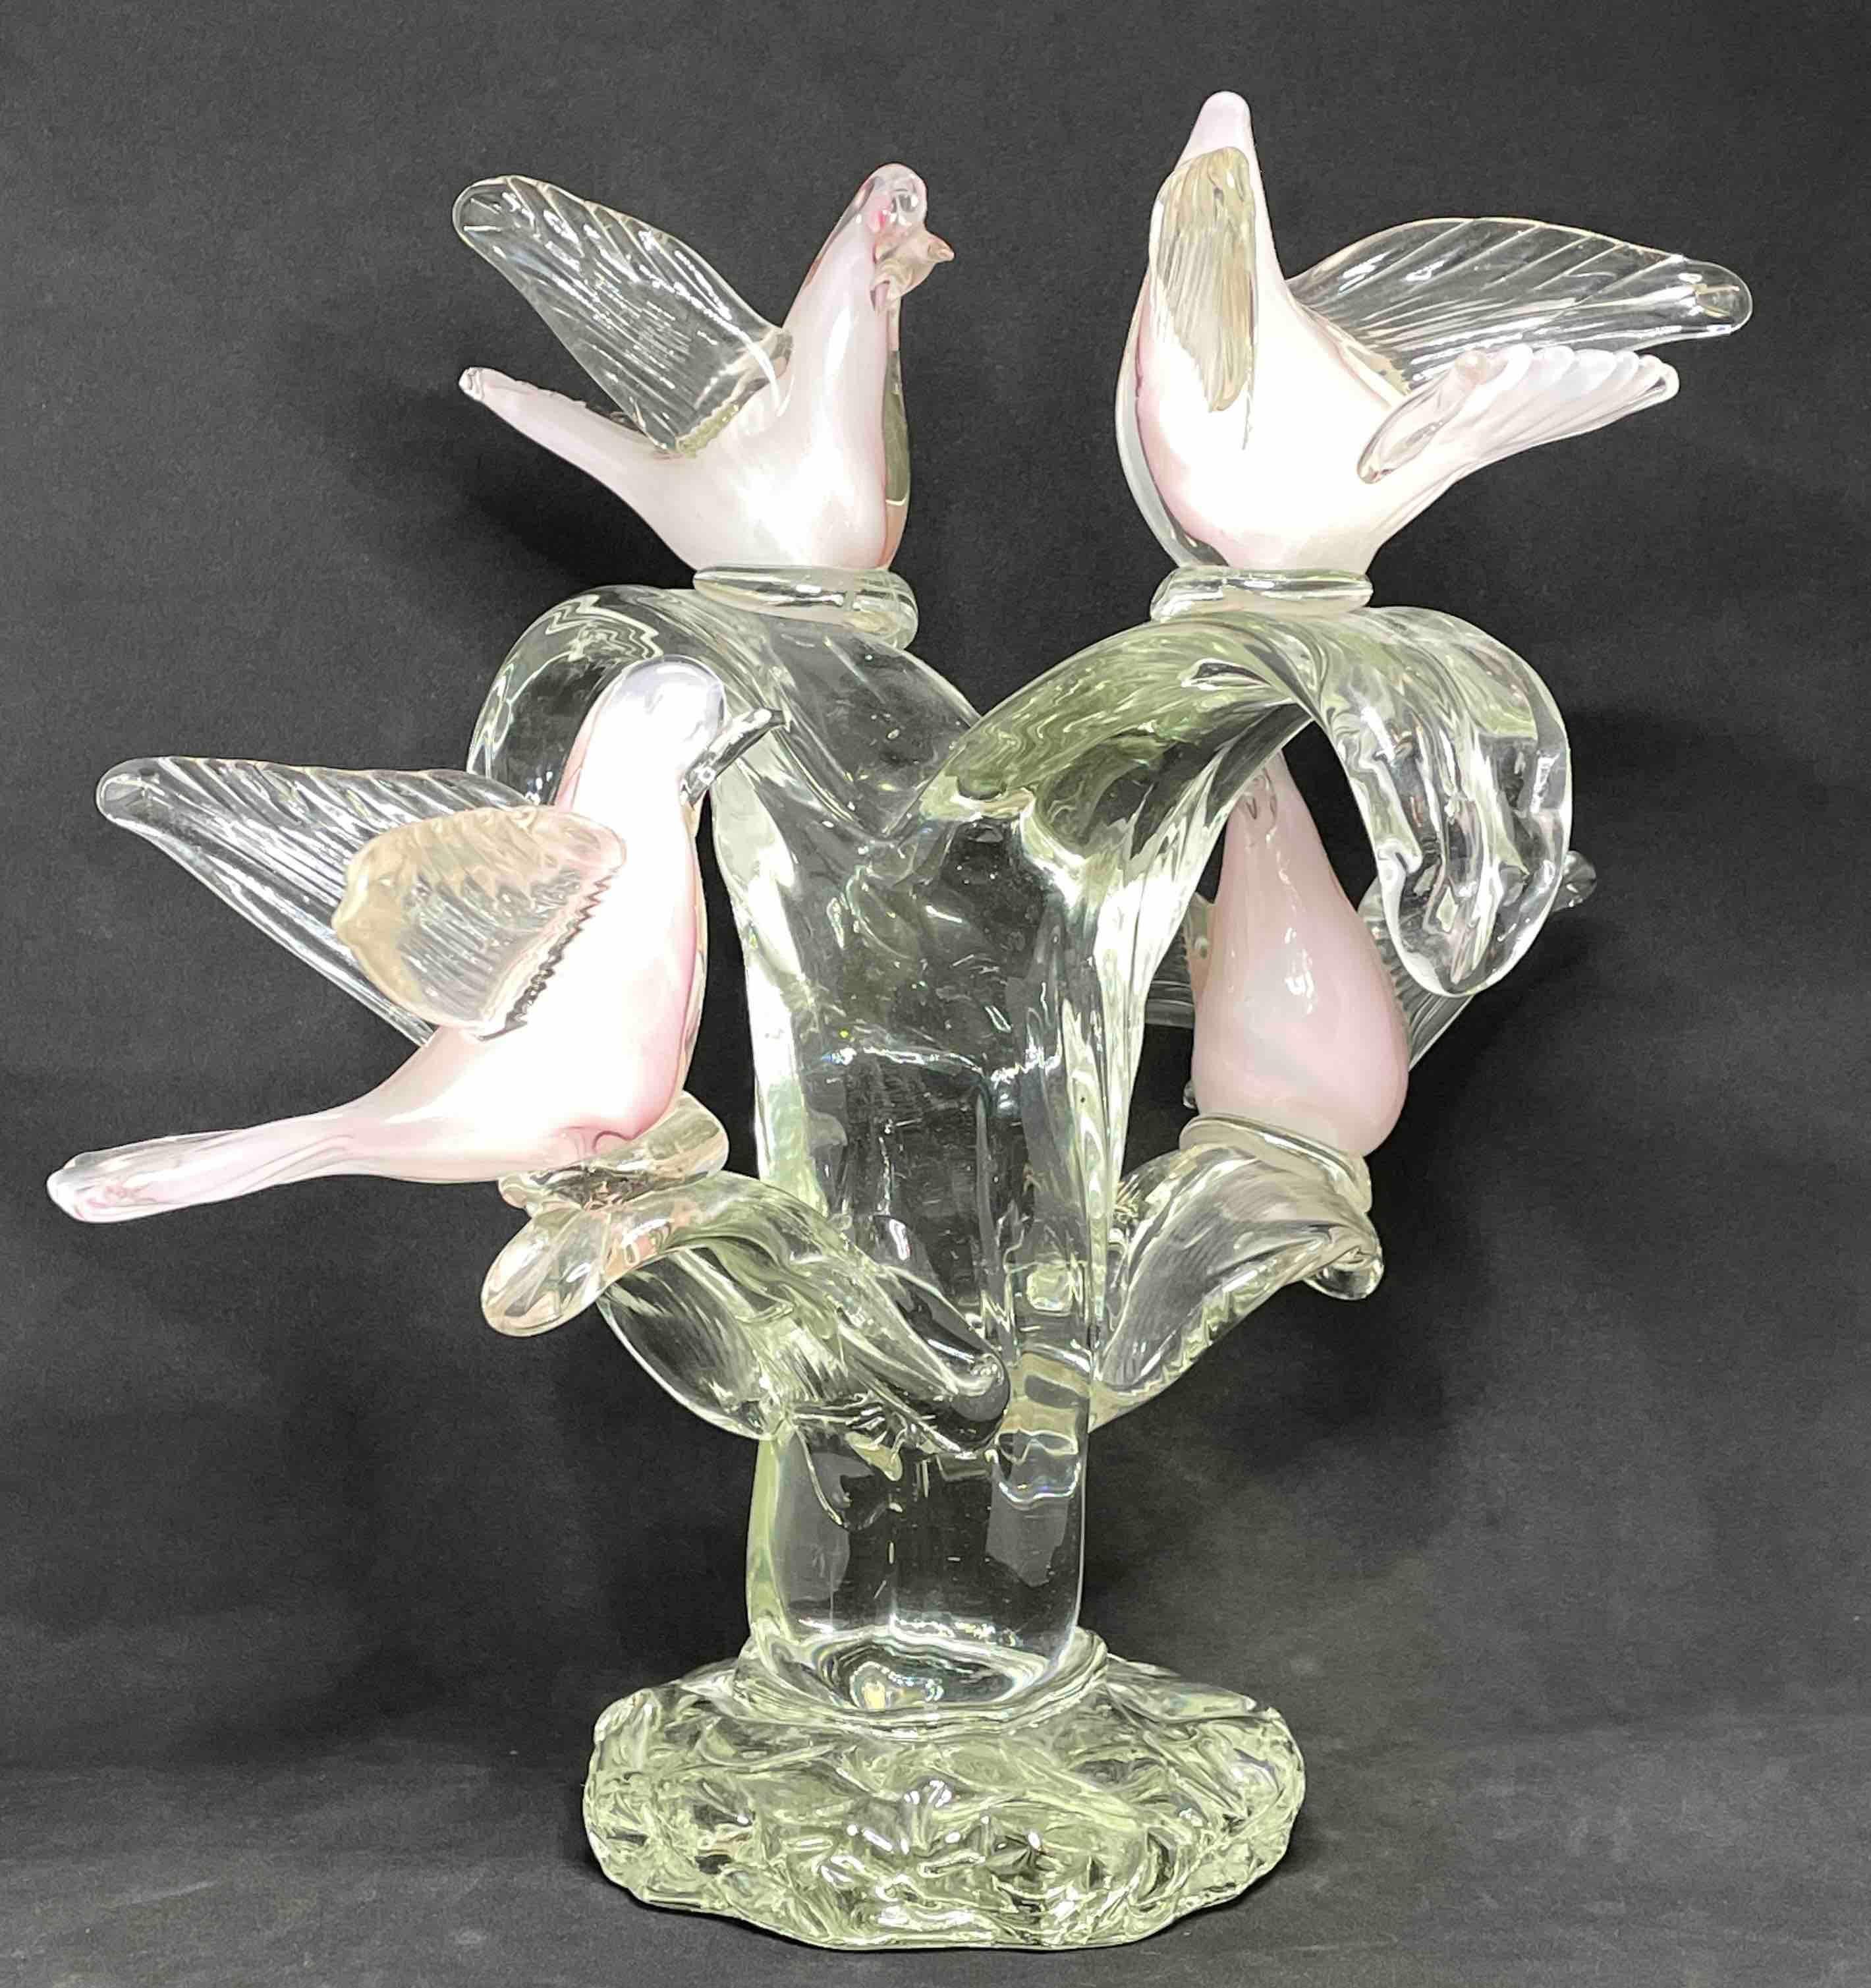 A Murano glass sculpture depicting four birds in white and light pink perched on a clear glass tree with branches attached to a base decorated with rounds. A nice centerpiece in each room. 